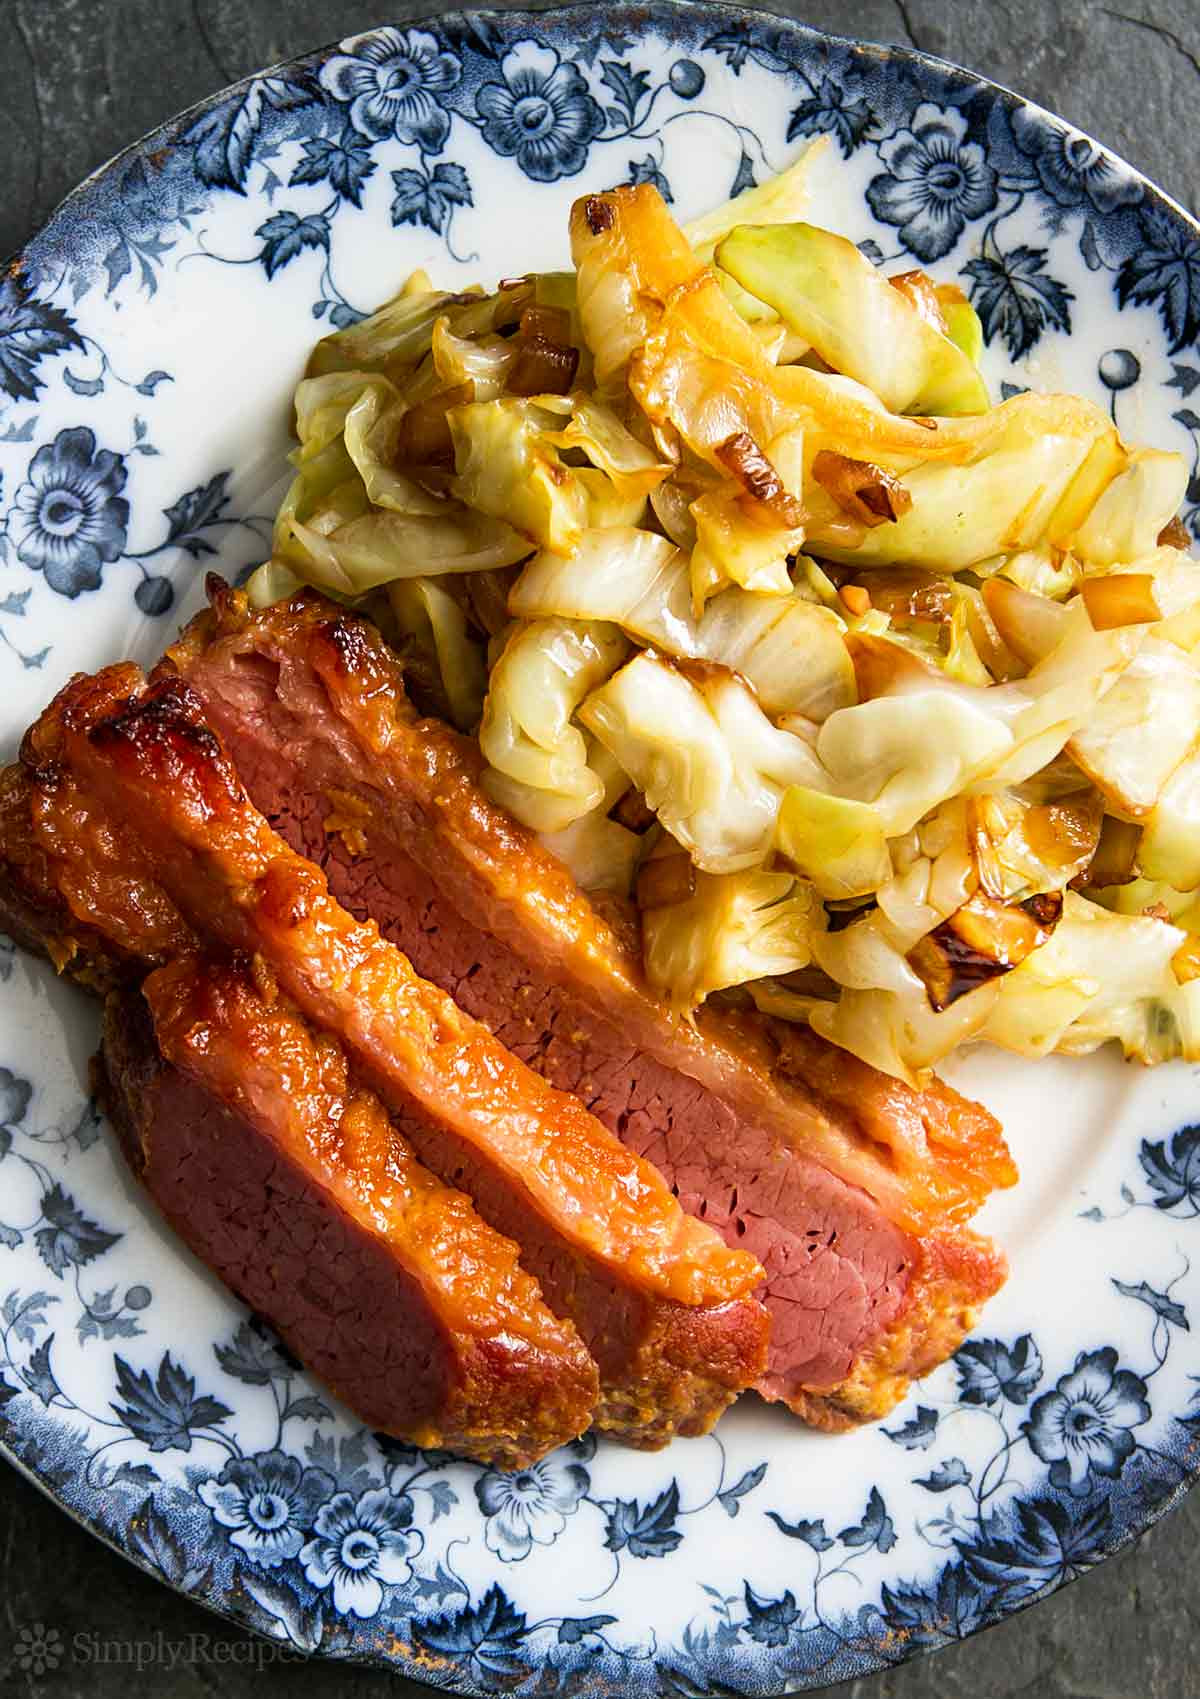 Best Corned Beef and Cabbage Recipe Lovely Corned Beef and Cabbage Recipe